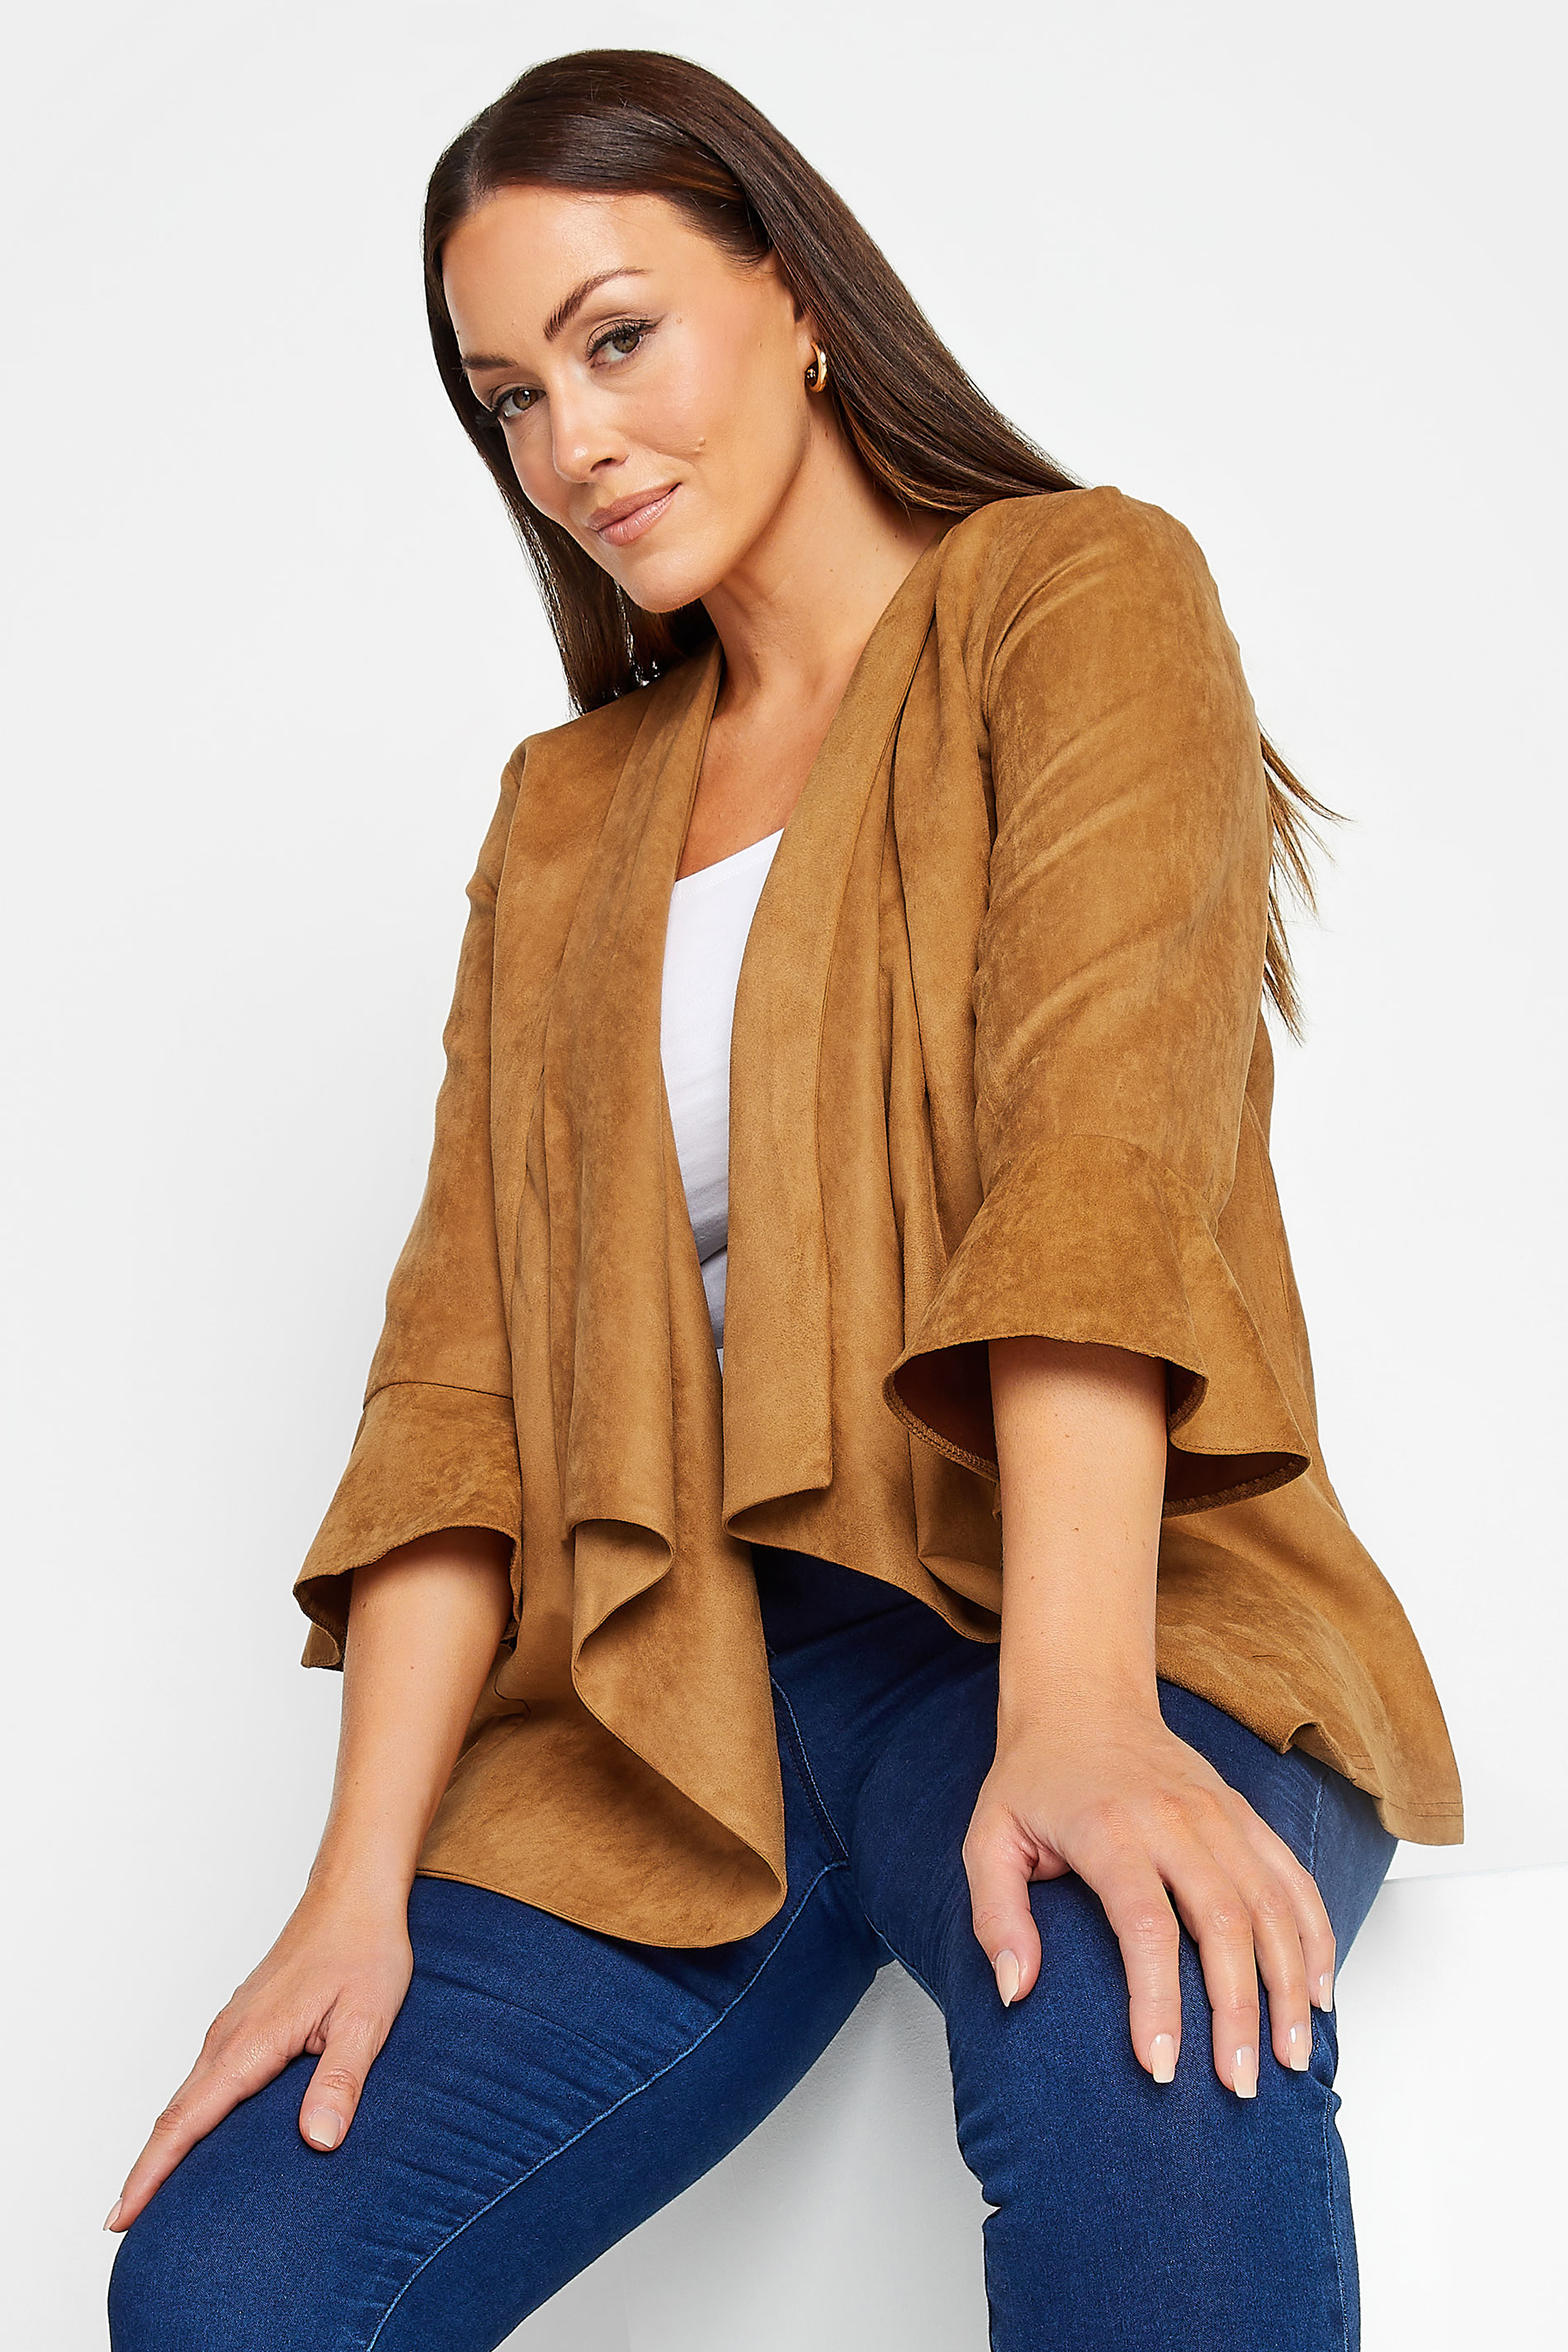 M&Co Tawny Brown Suedette Waterfall Jacket | M&Co 1